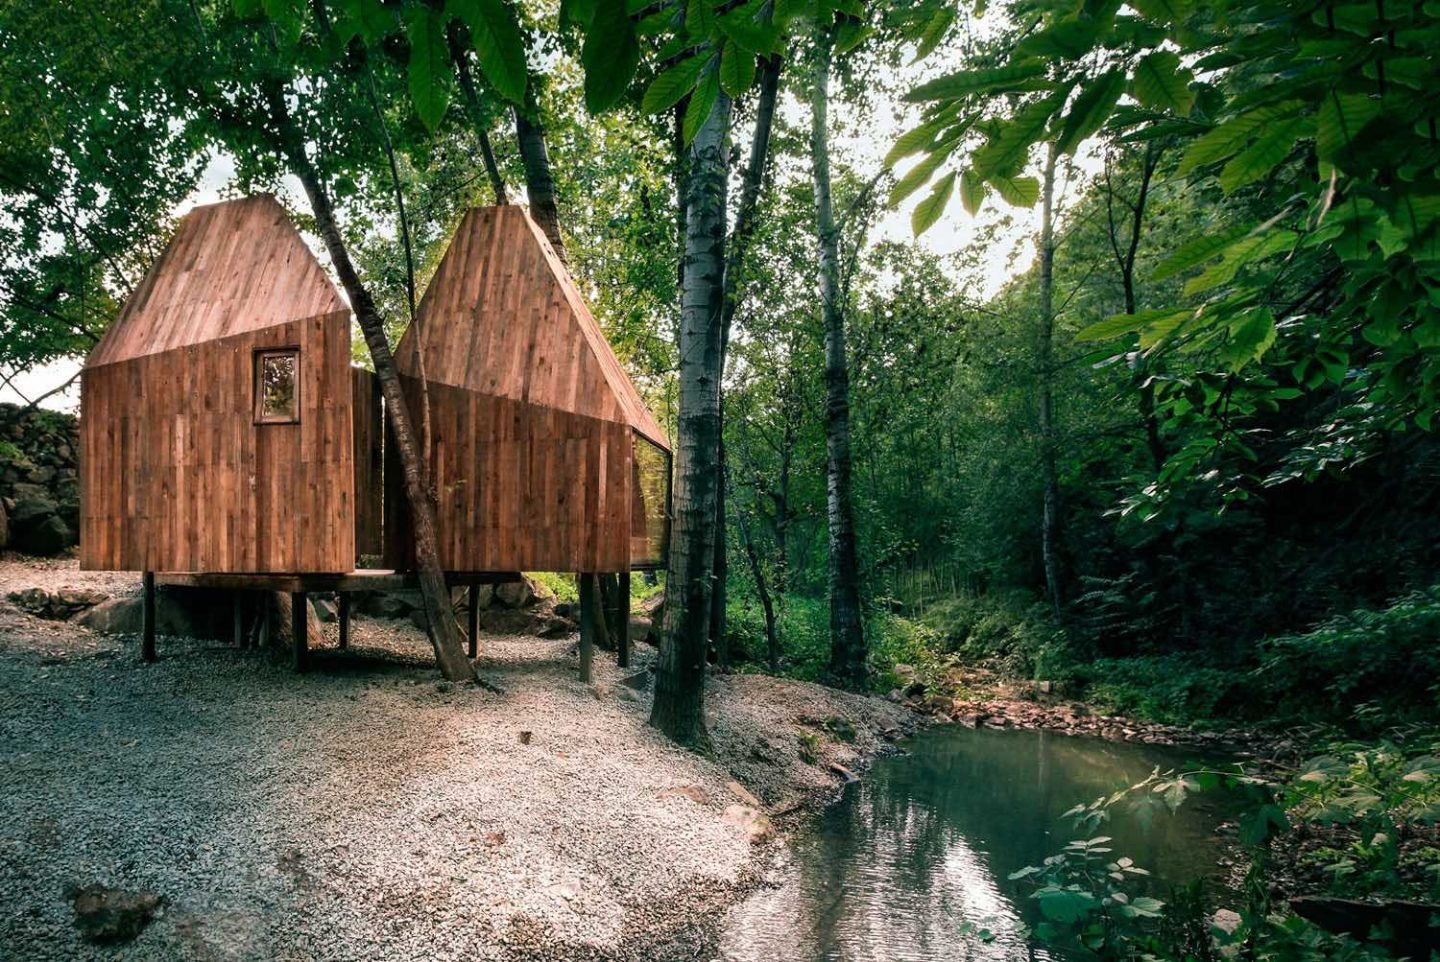 Architecture-Wee-Studio-Treehouse-10